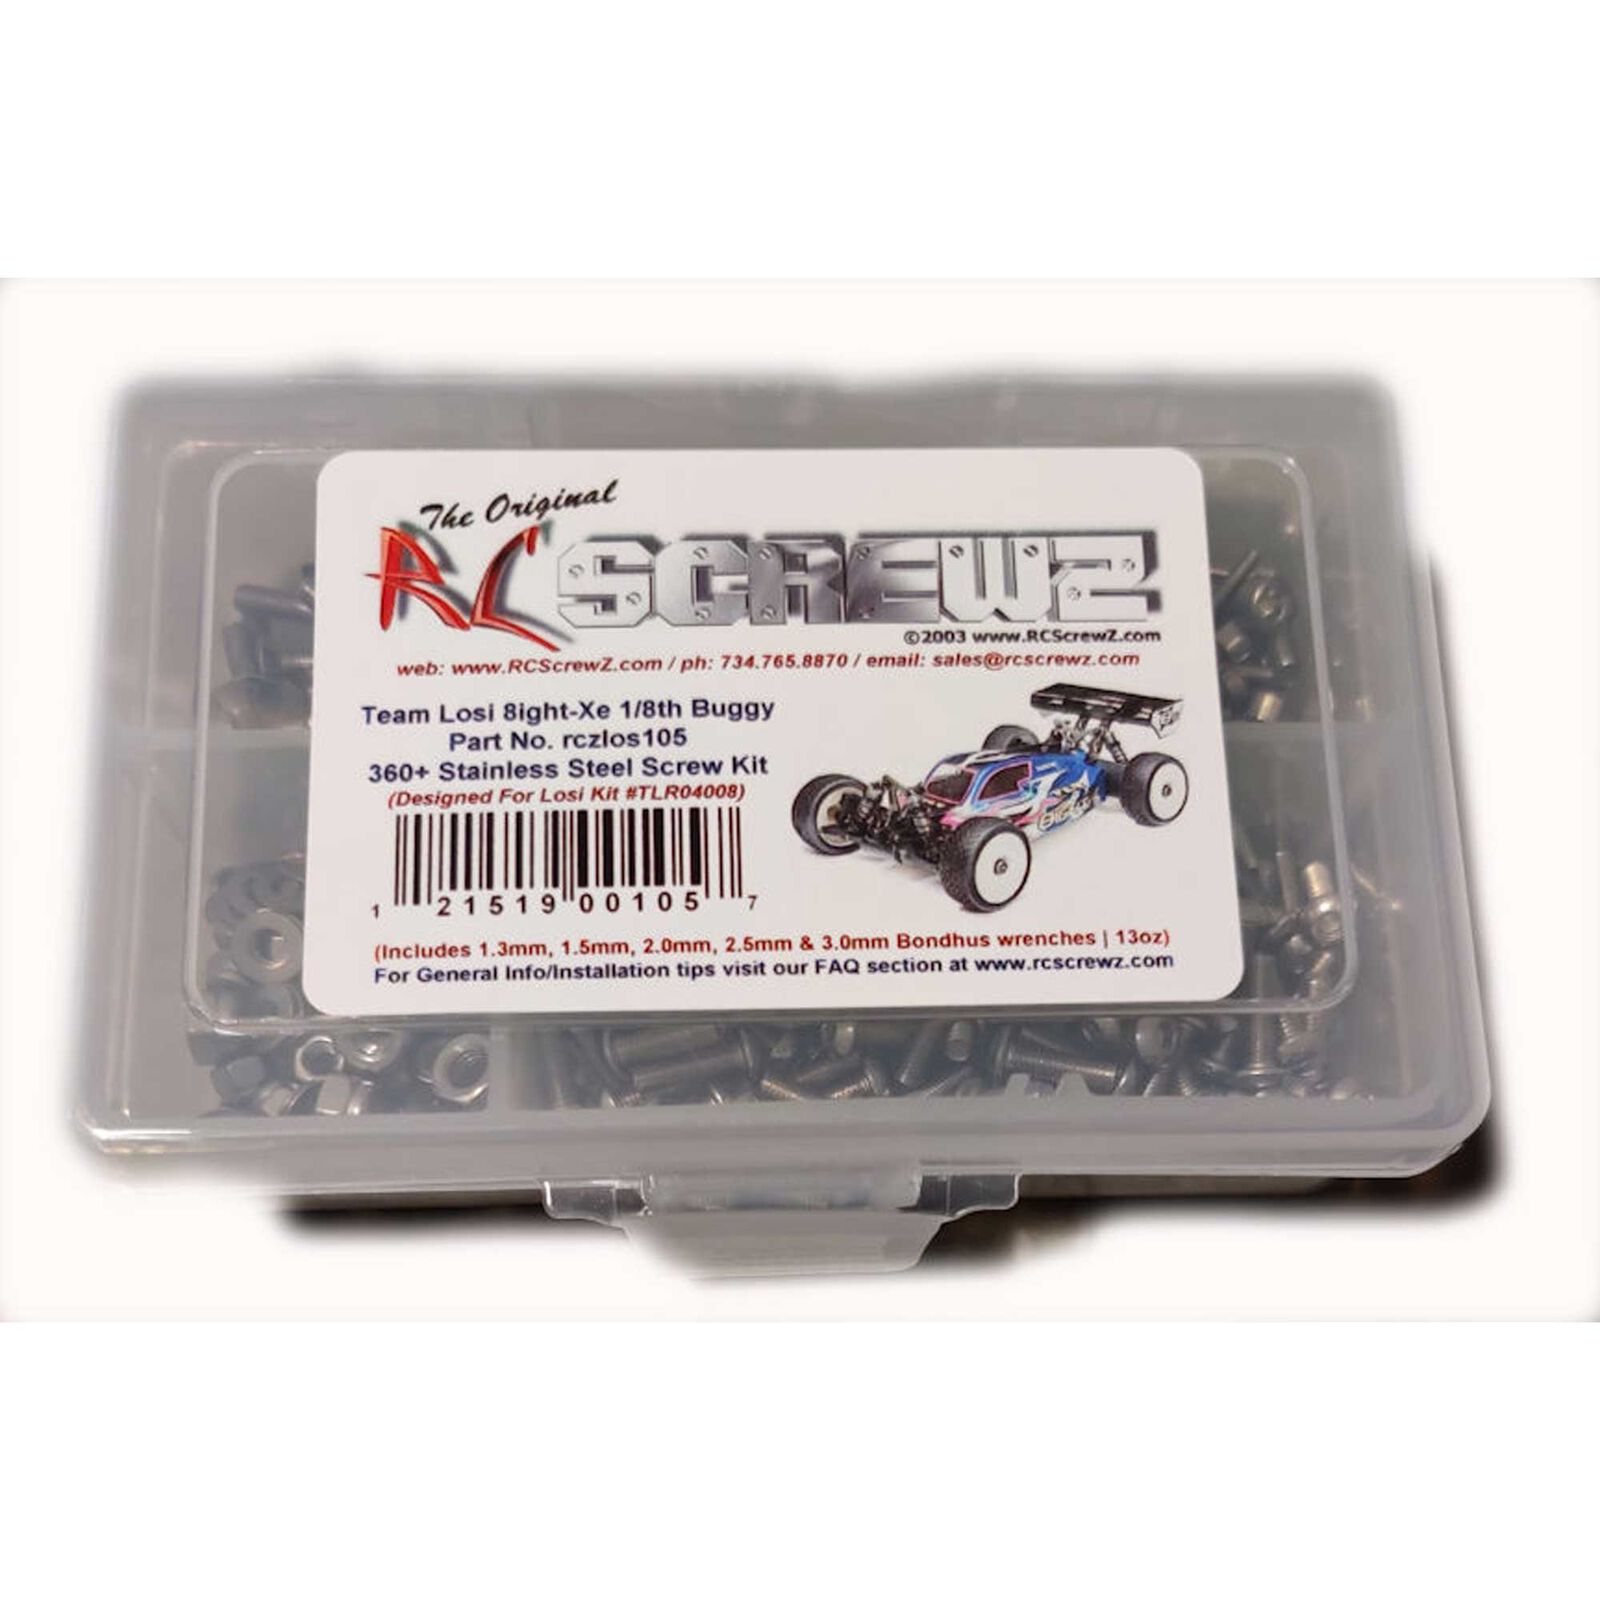 Stainless Steel Screw Kit: TLR 8IGHT-XE